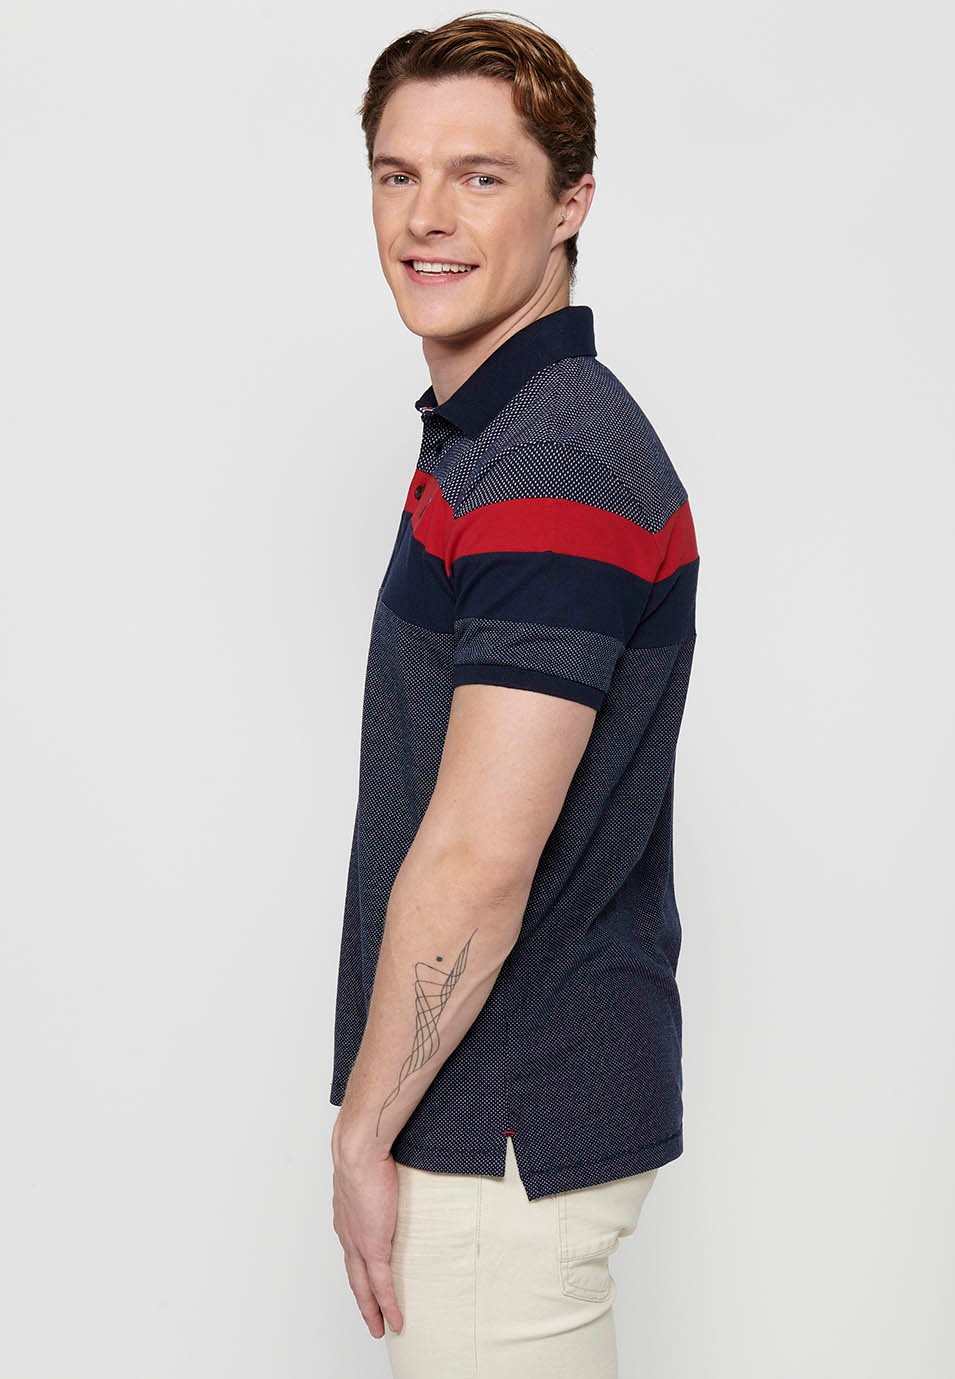 Short-sleeved polo shirt, with stripes in two colors, black and red for men